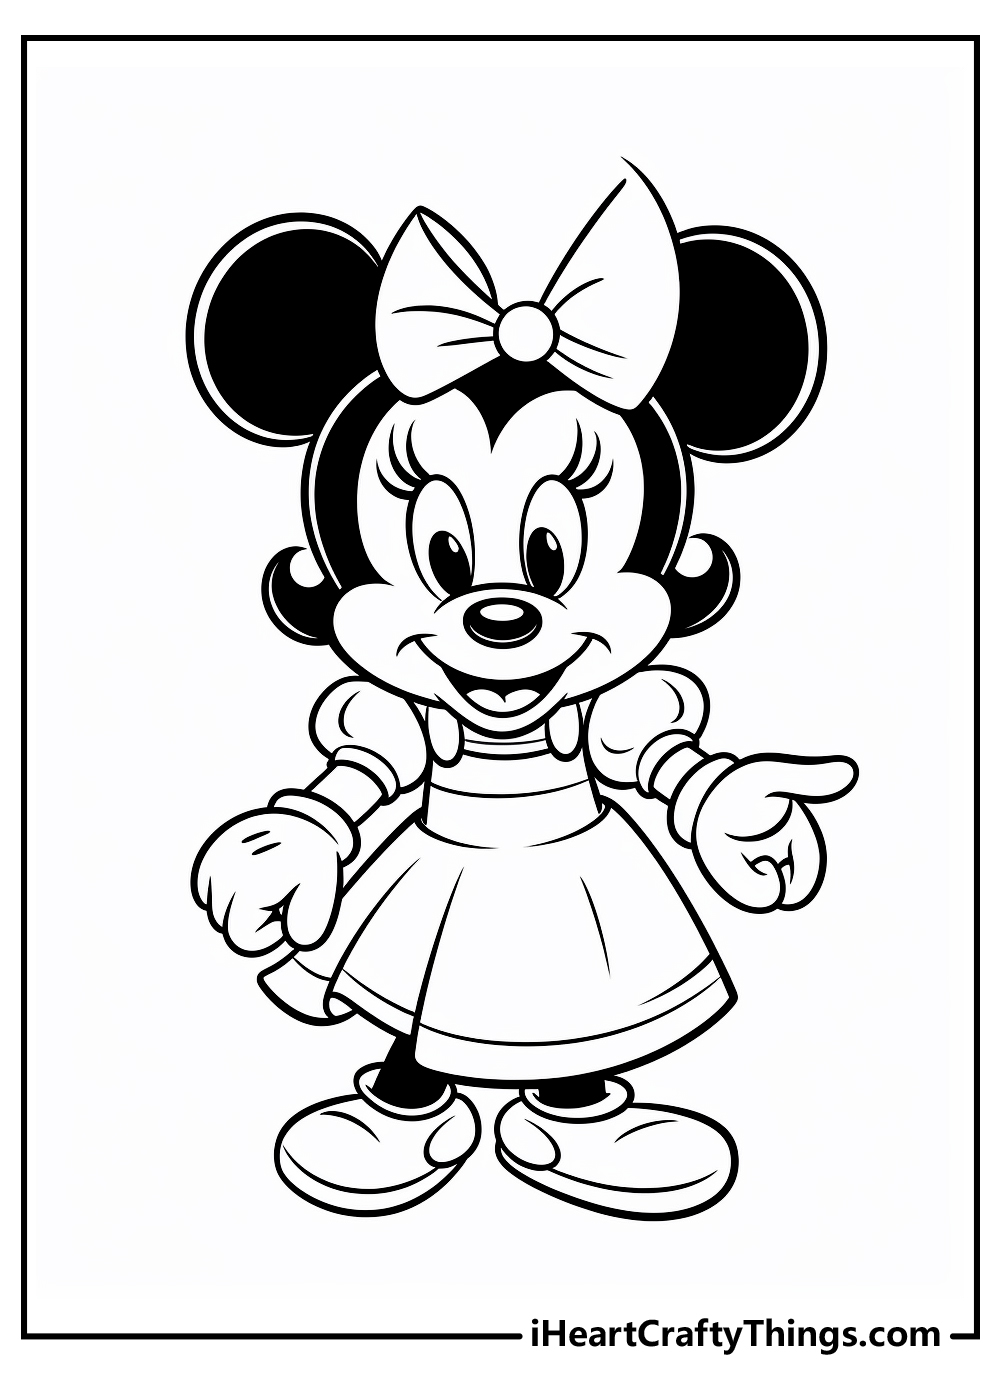 Minnie mouse coloring pages for kids